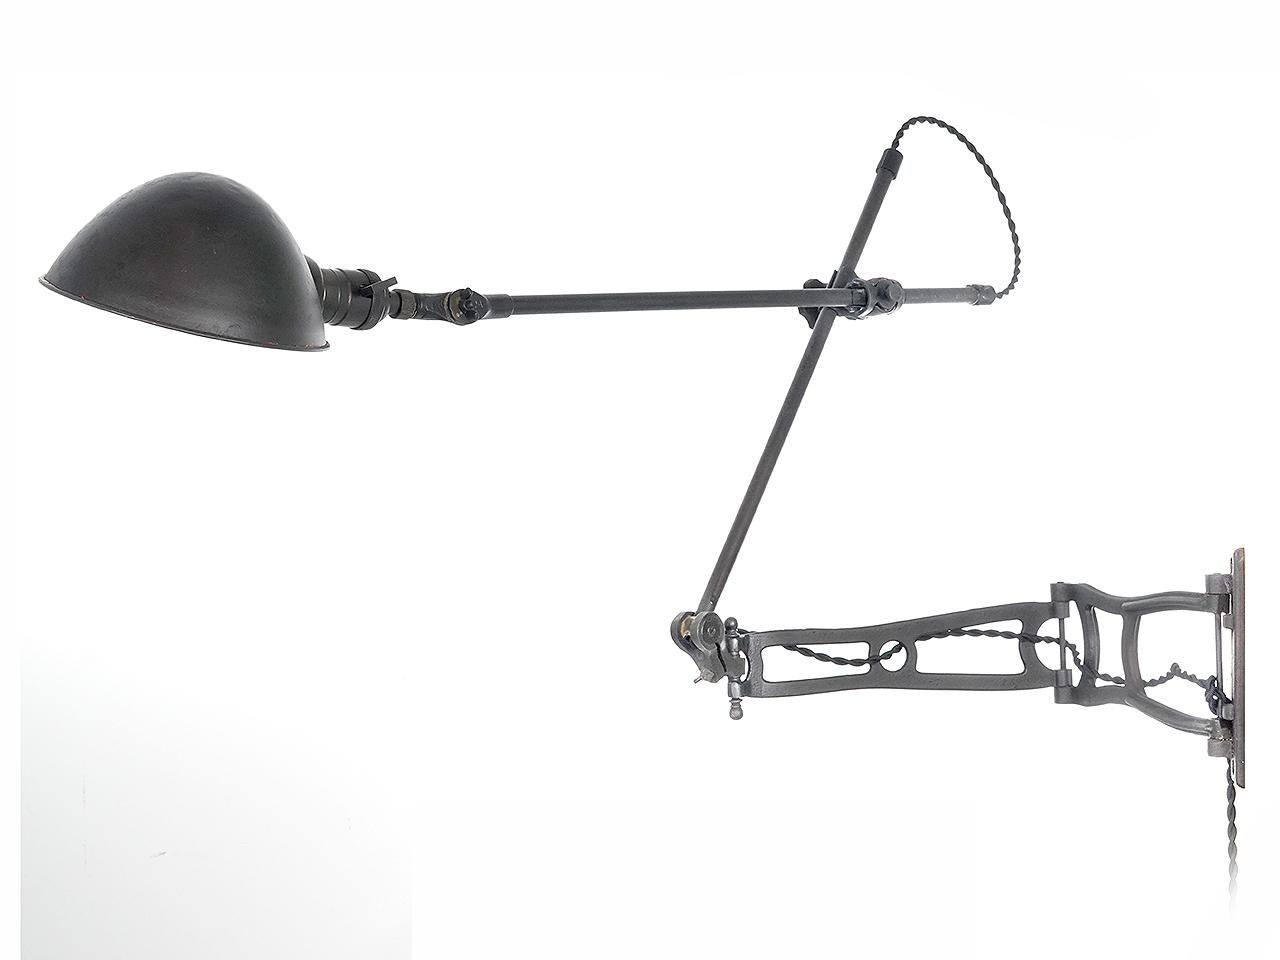 This articulated arm lamp is an O.C. White and its a good one. These lamps have always been sought after by collectors. It has 2 pipe arms using 3 unique style articulating fittings. This is all connected to a hinged cast iron swing outrigger wall